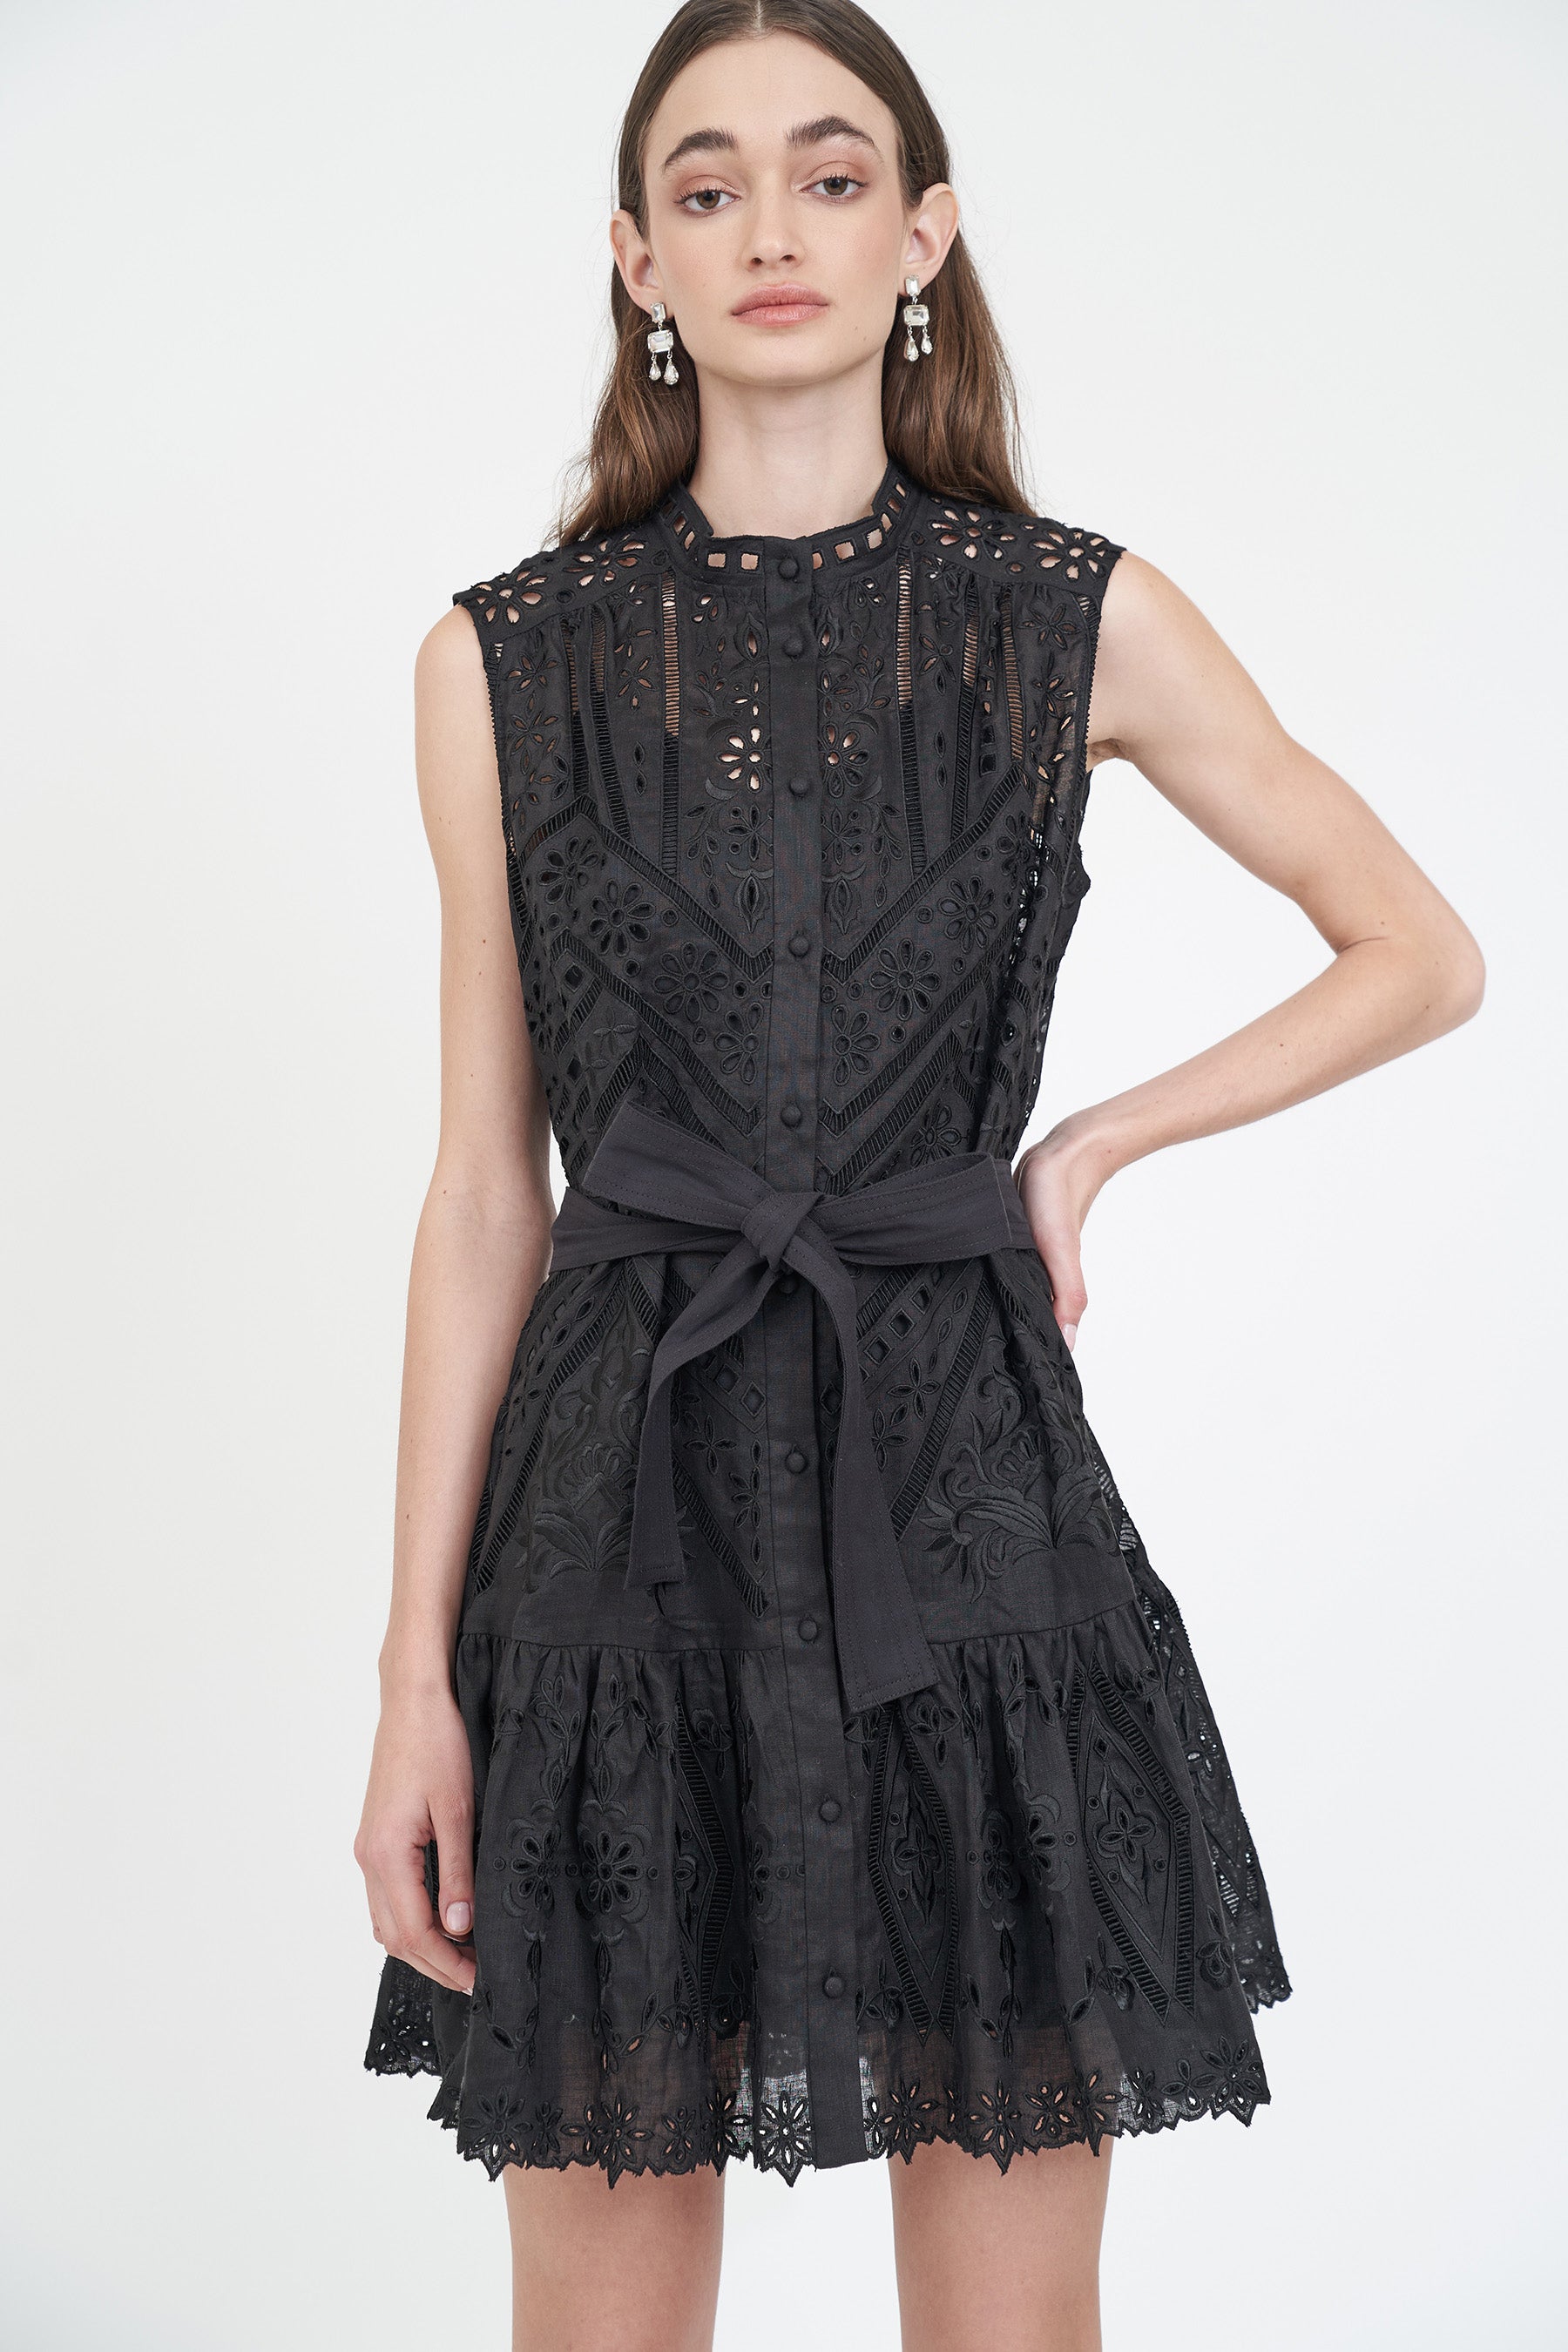 Emerson Dress - Black Embroidery